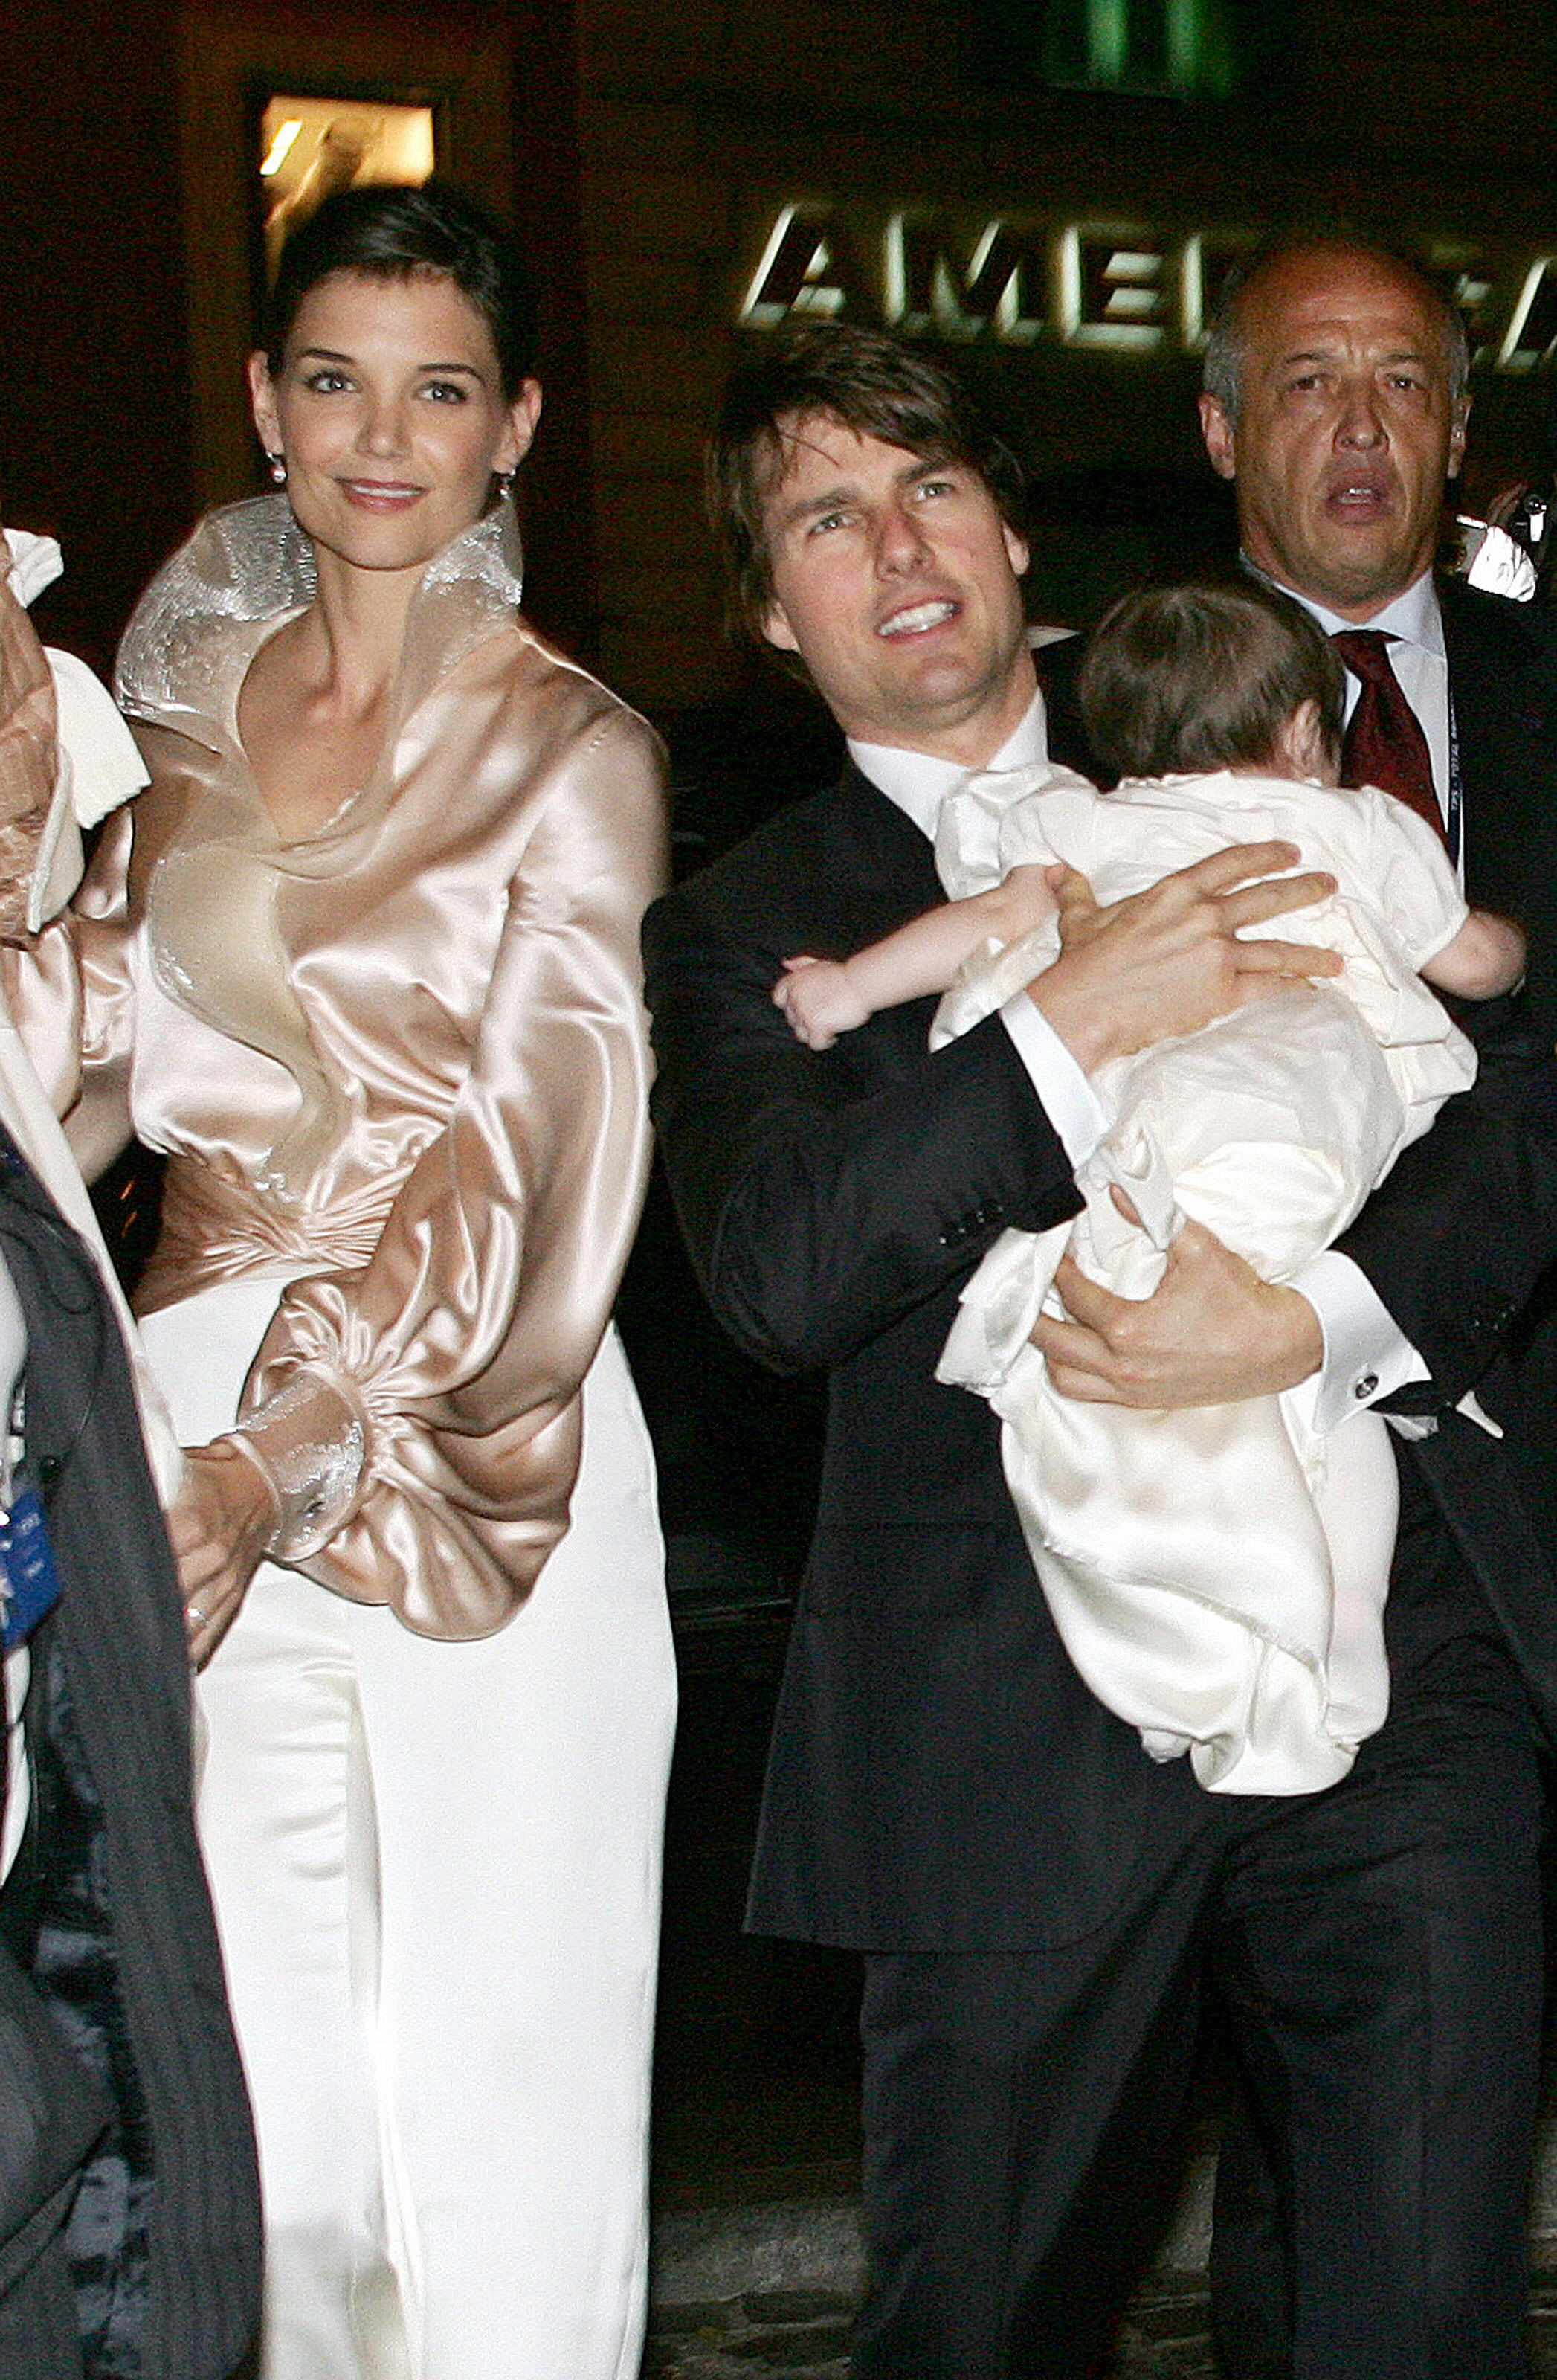 Tom Cruise, Katie Holmes, and Suri Cruise in central Rome, 16 November 2006 | Source: Getty Images